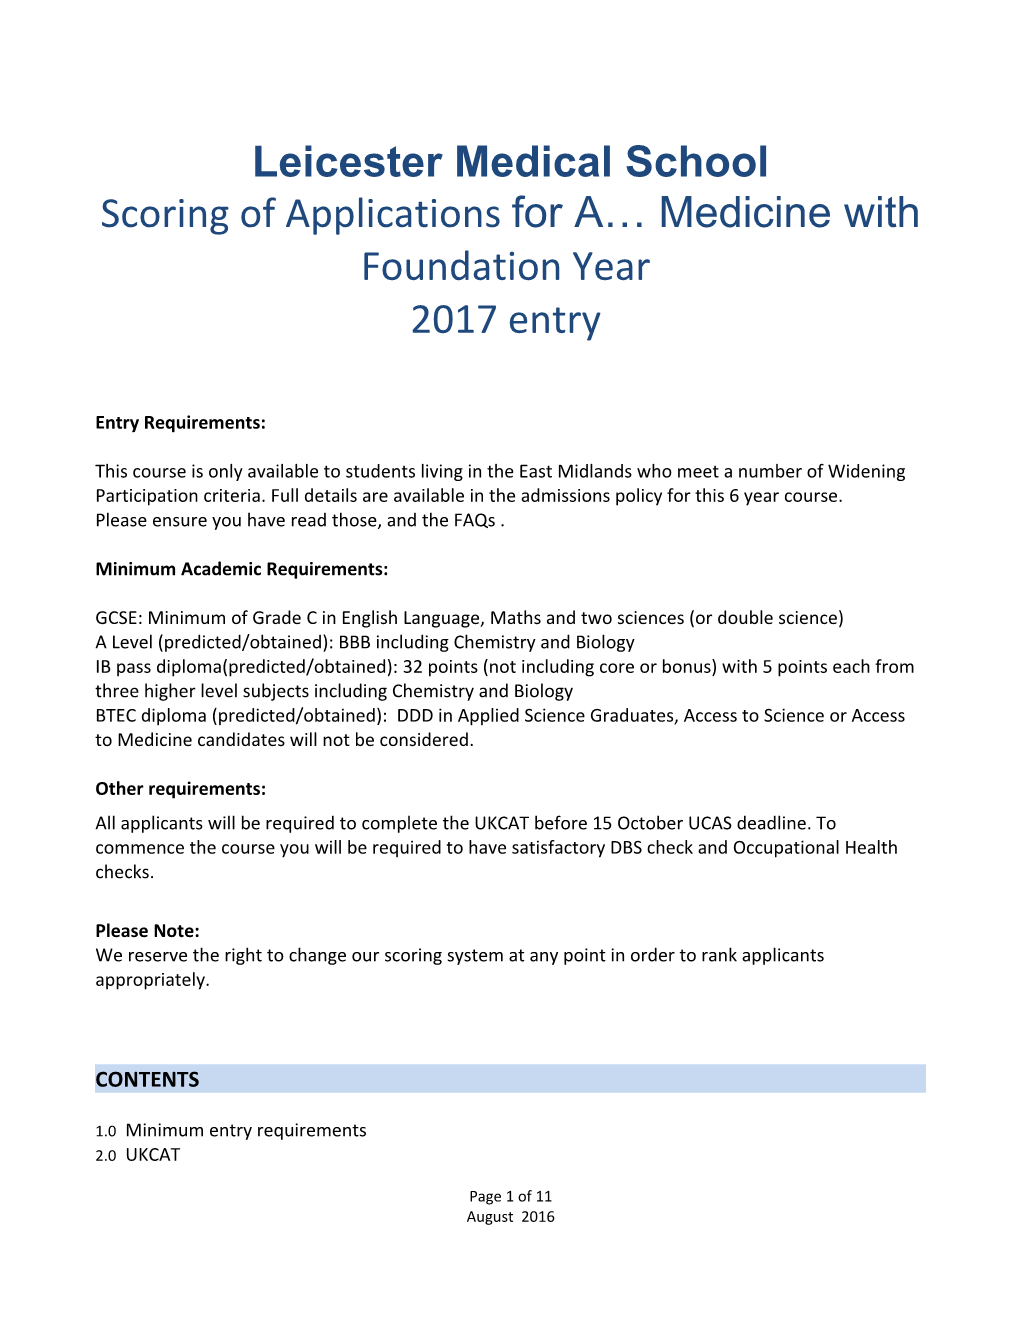 Scoring of Applications for a Medicine with Foundation Year